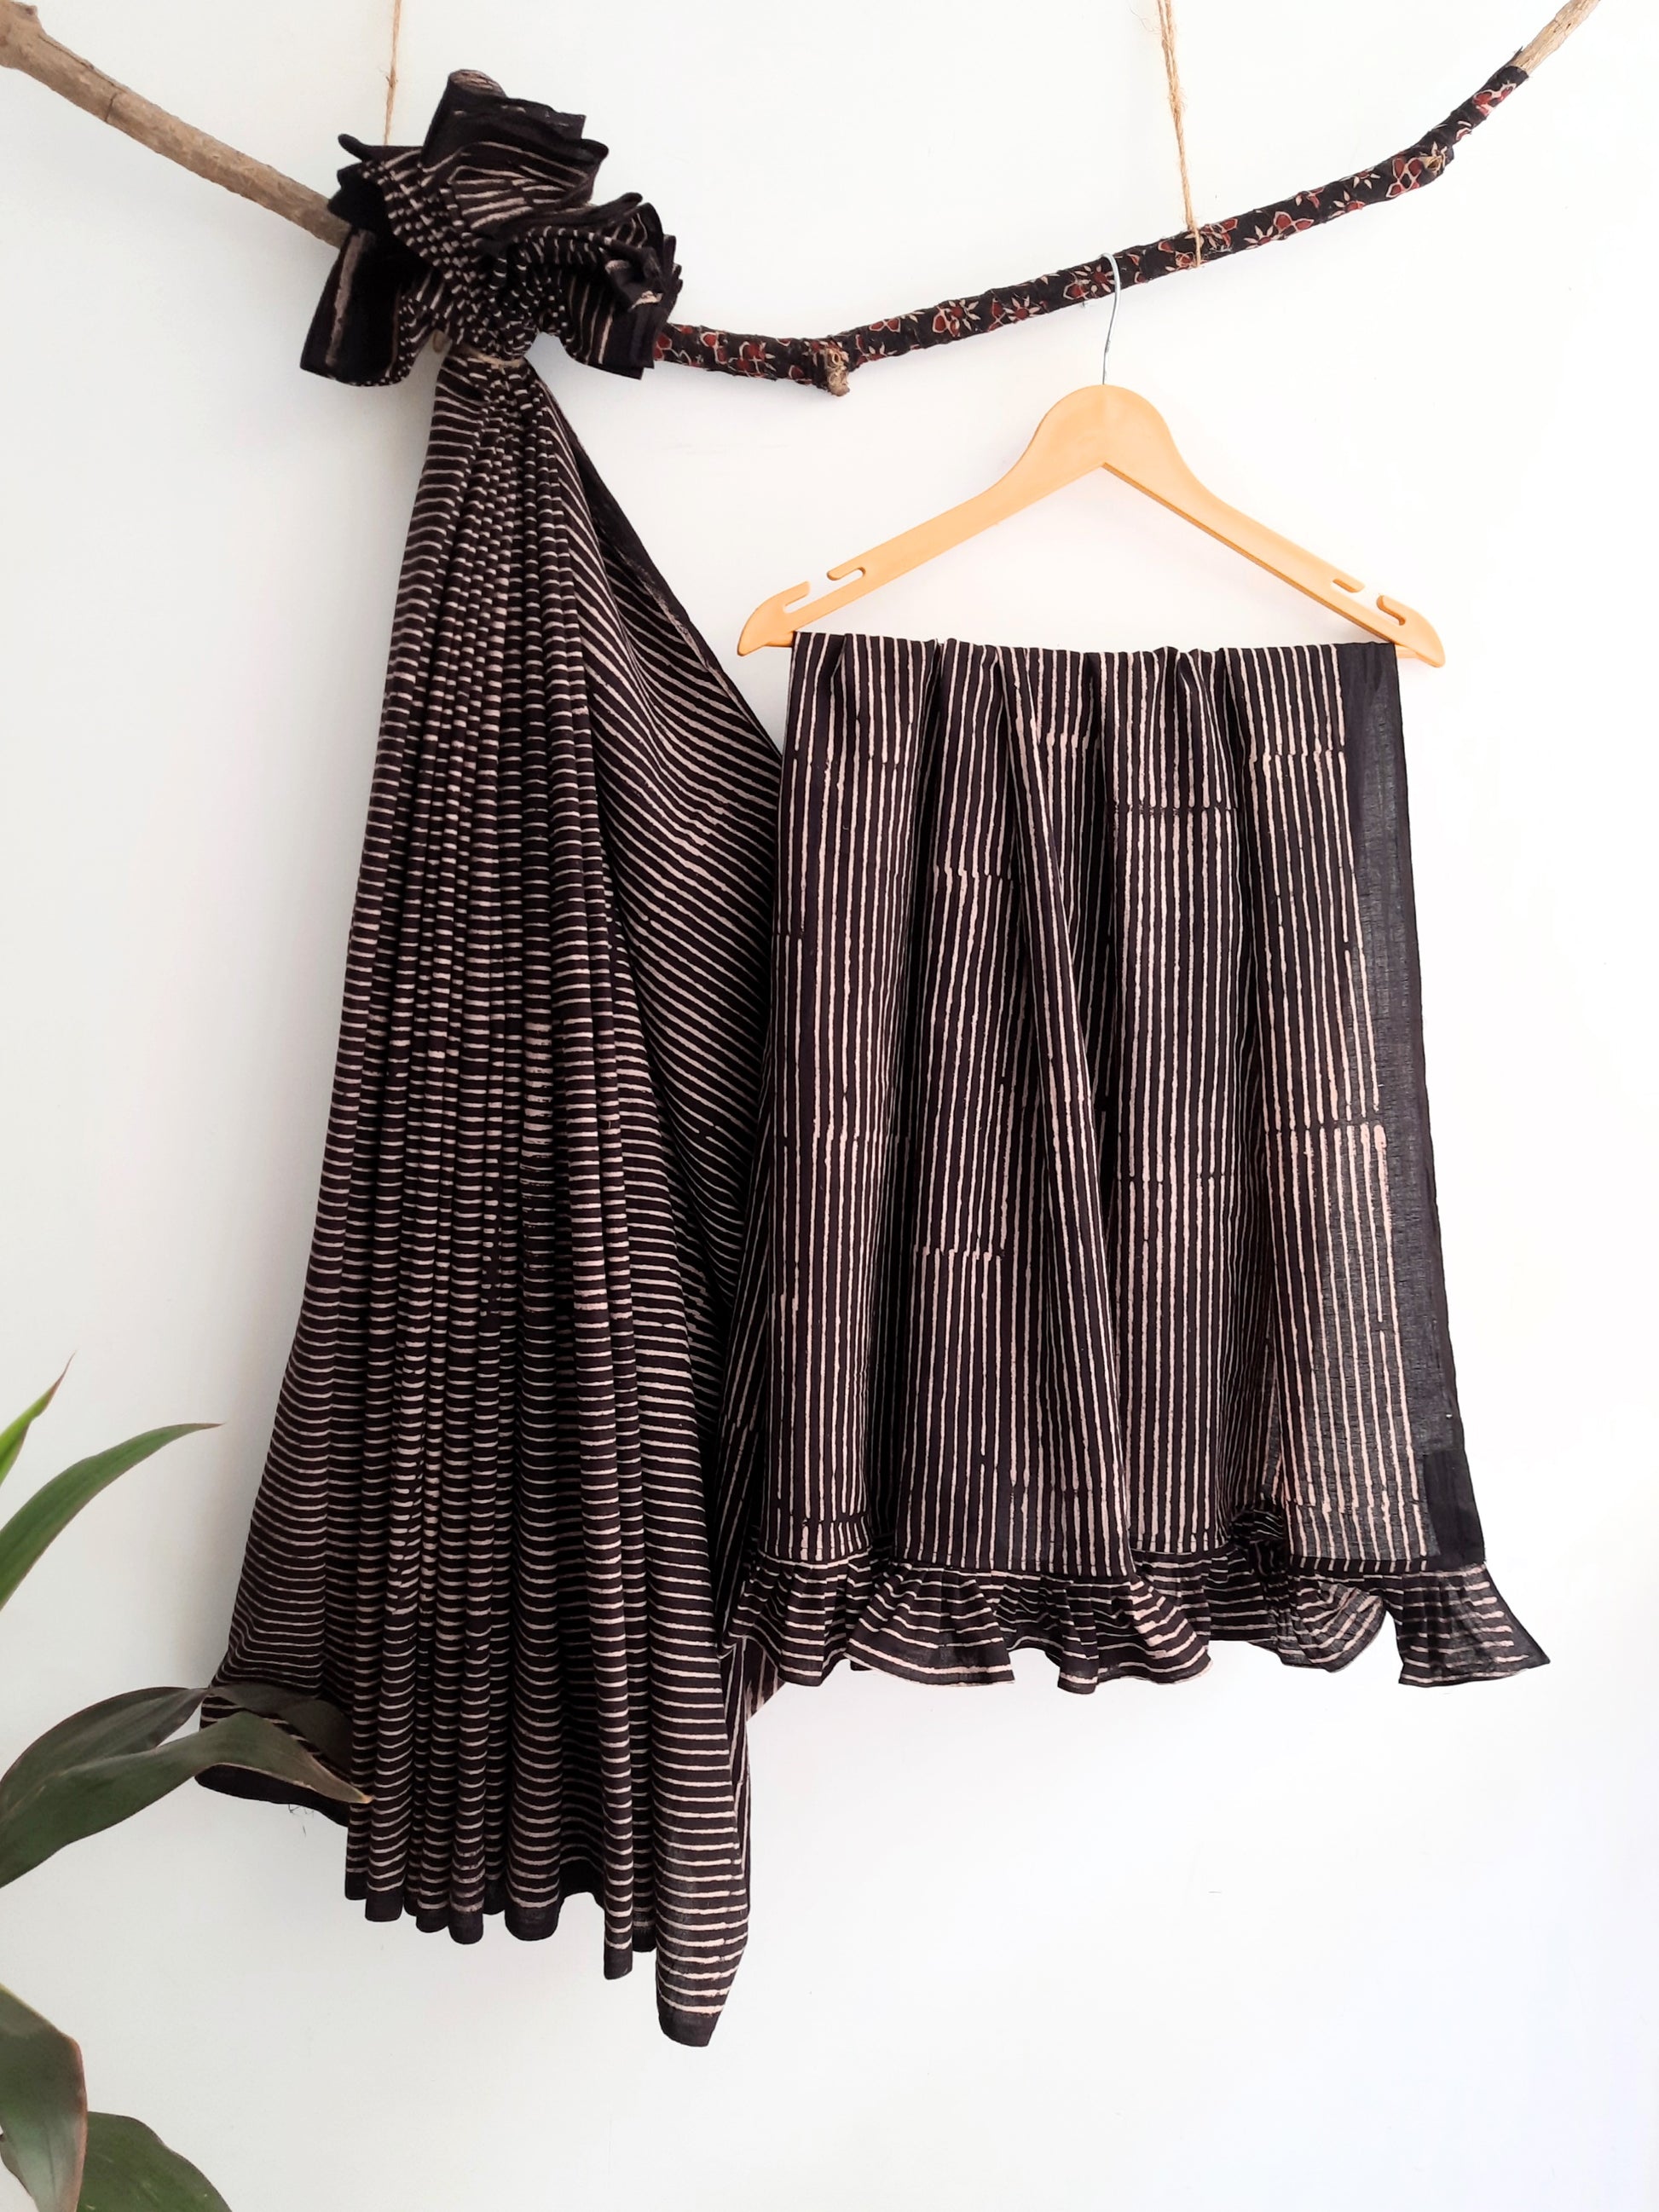 Black and beige stripes saree blouse coord set, Slow fashion